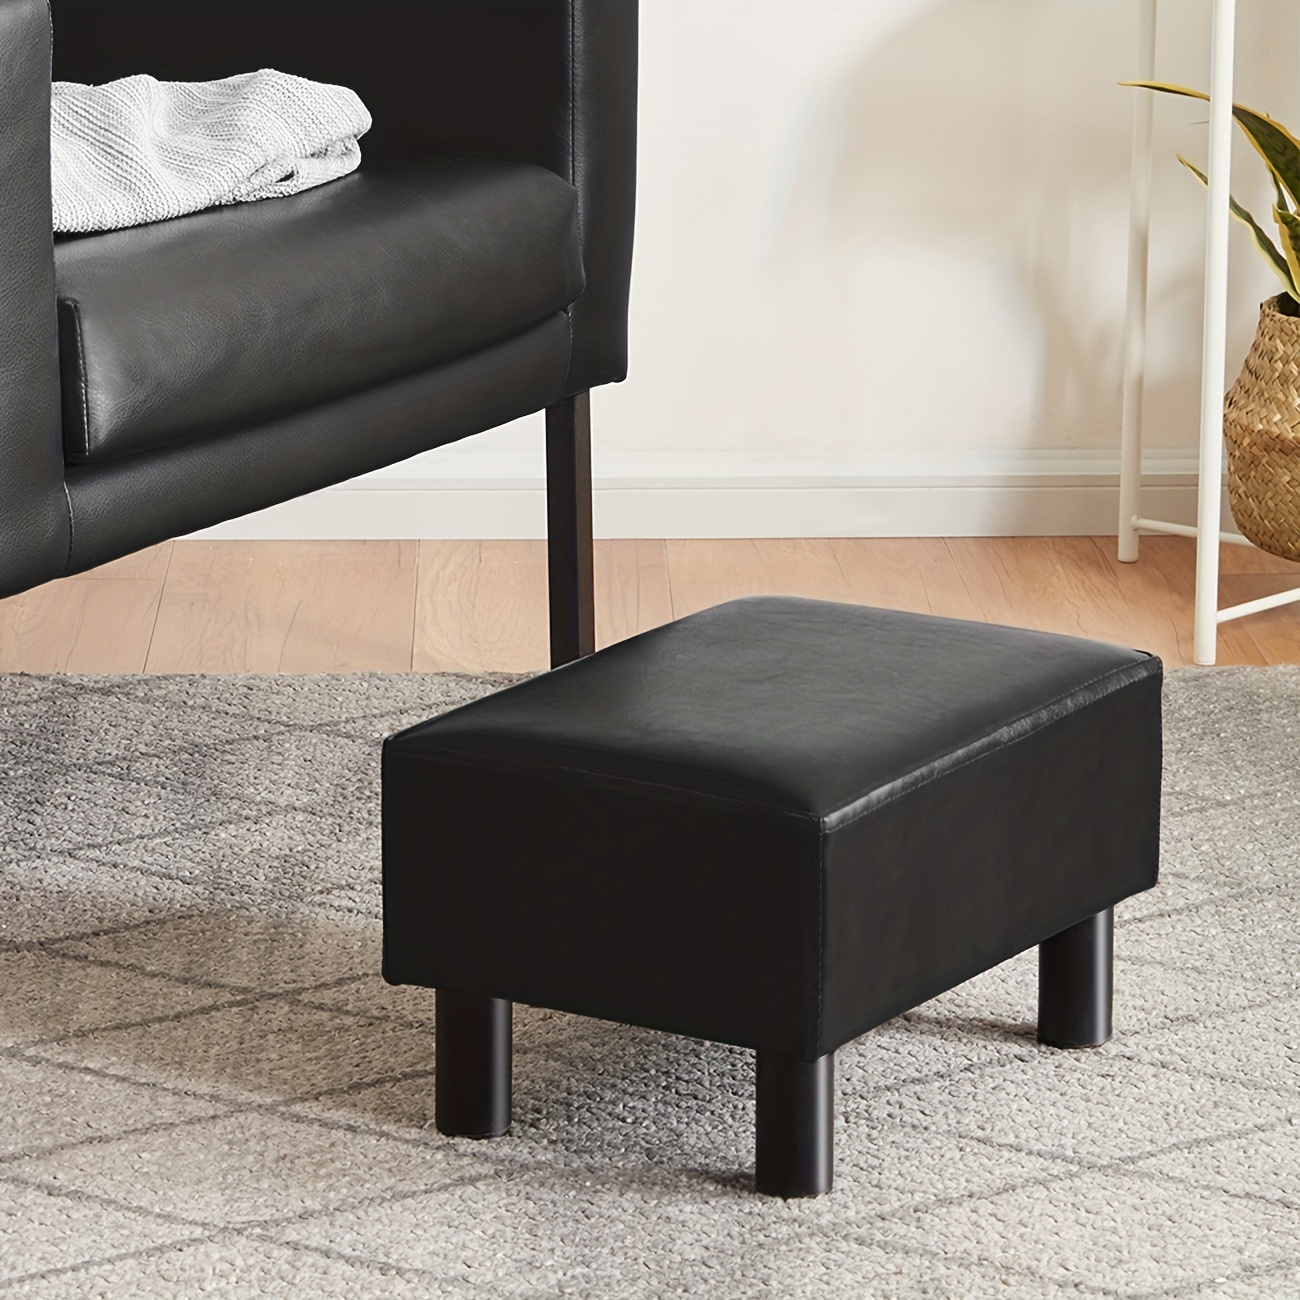 Small Rectangle Foot Stool, Leather Footrest Ottoman with Non-Skid Wood  Legs, Modern Footstools Step Stool